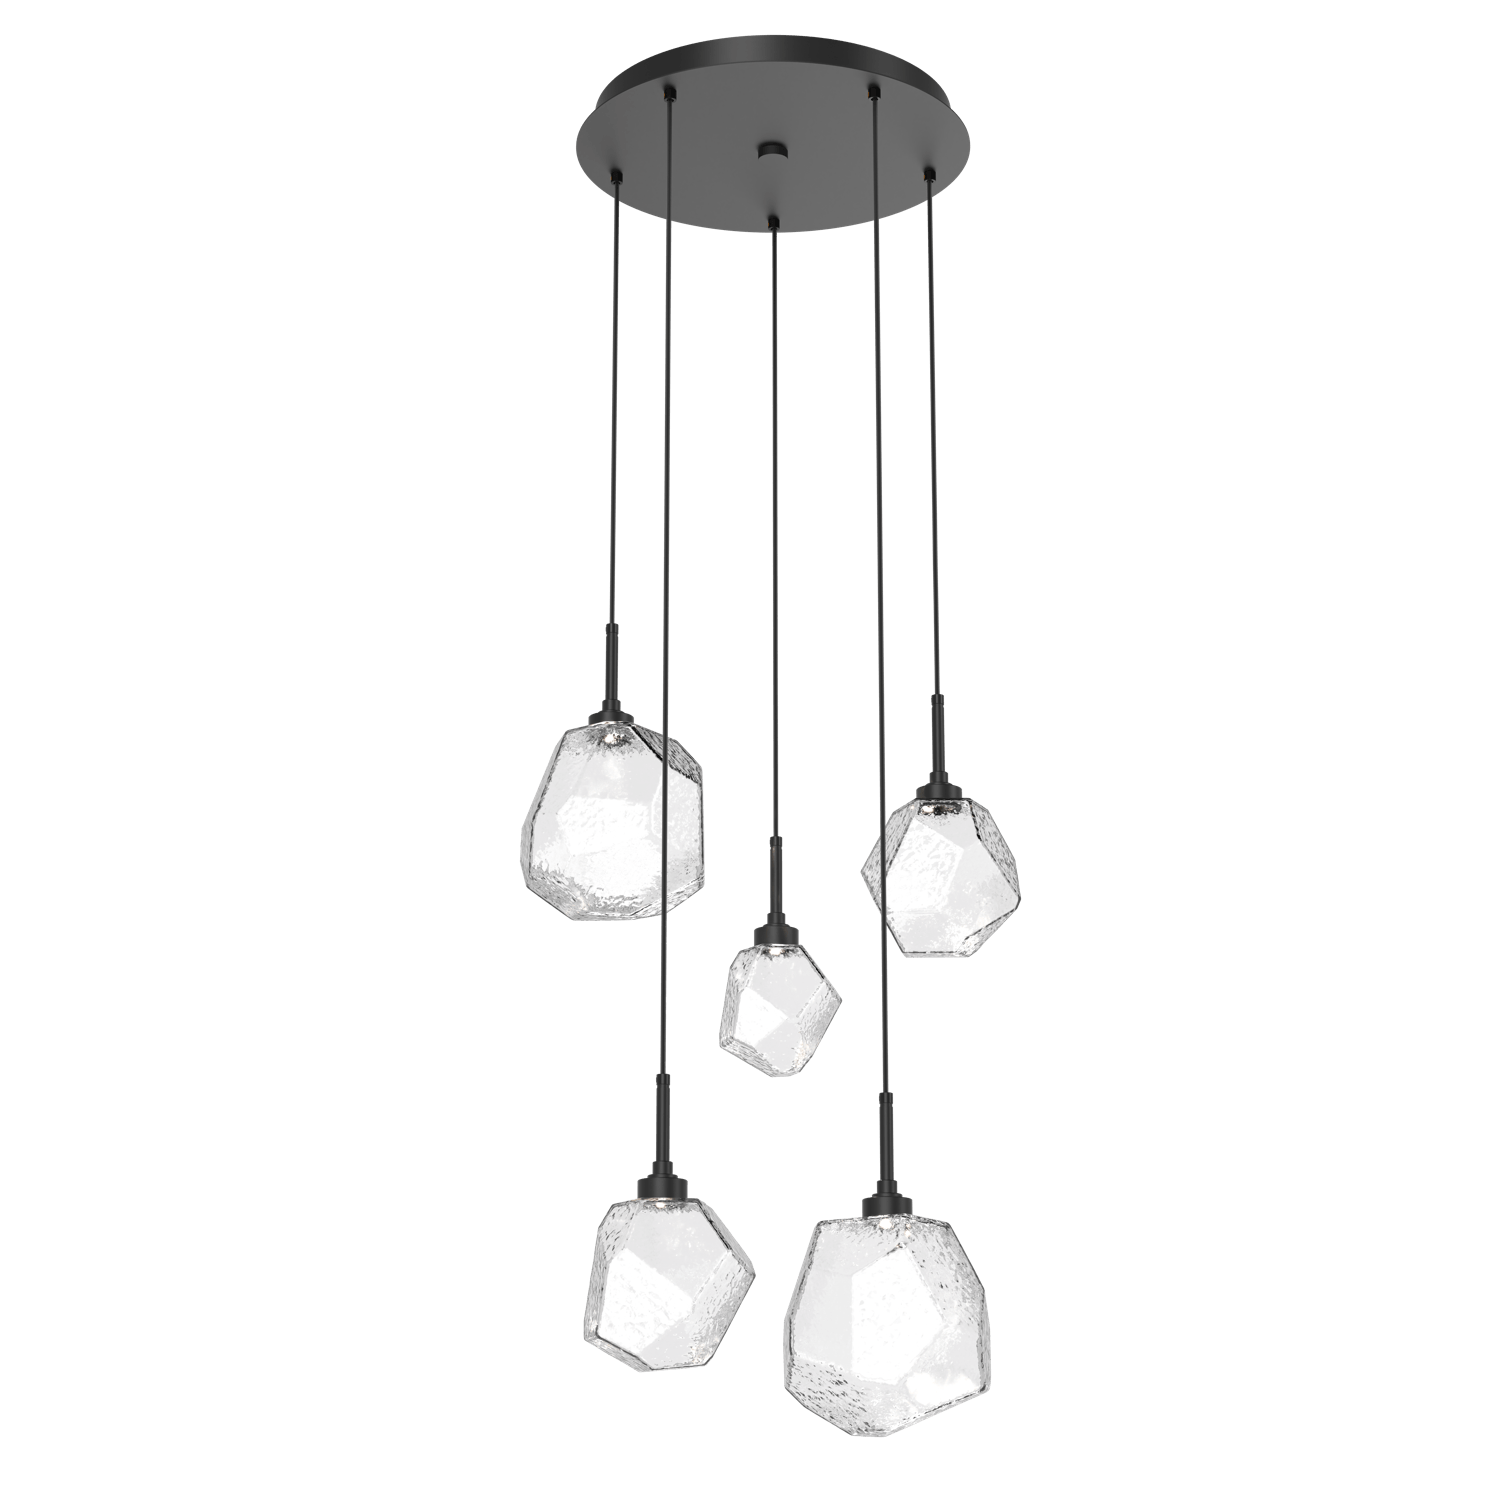 CHB0039-05-MB-C-Hammerton-Studio-Gem-5-light-round-pendant-chandelier-with-matte-black-finish-and-clear-blown-glass-shades-and-LED-lamping